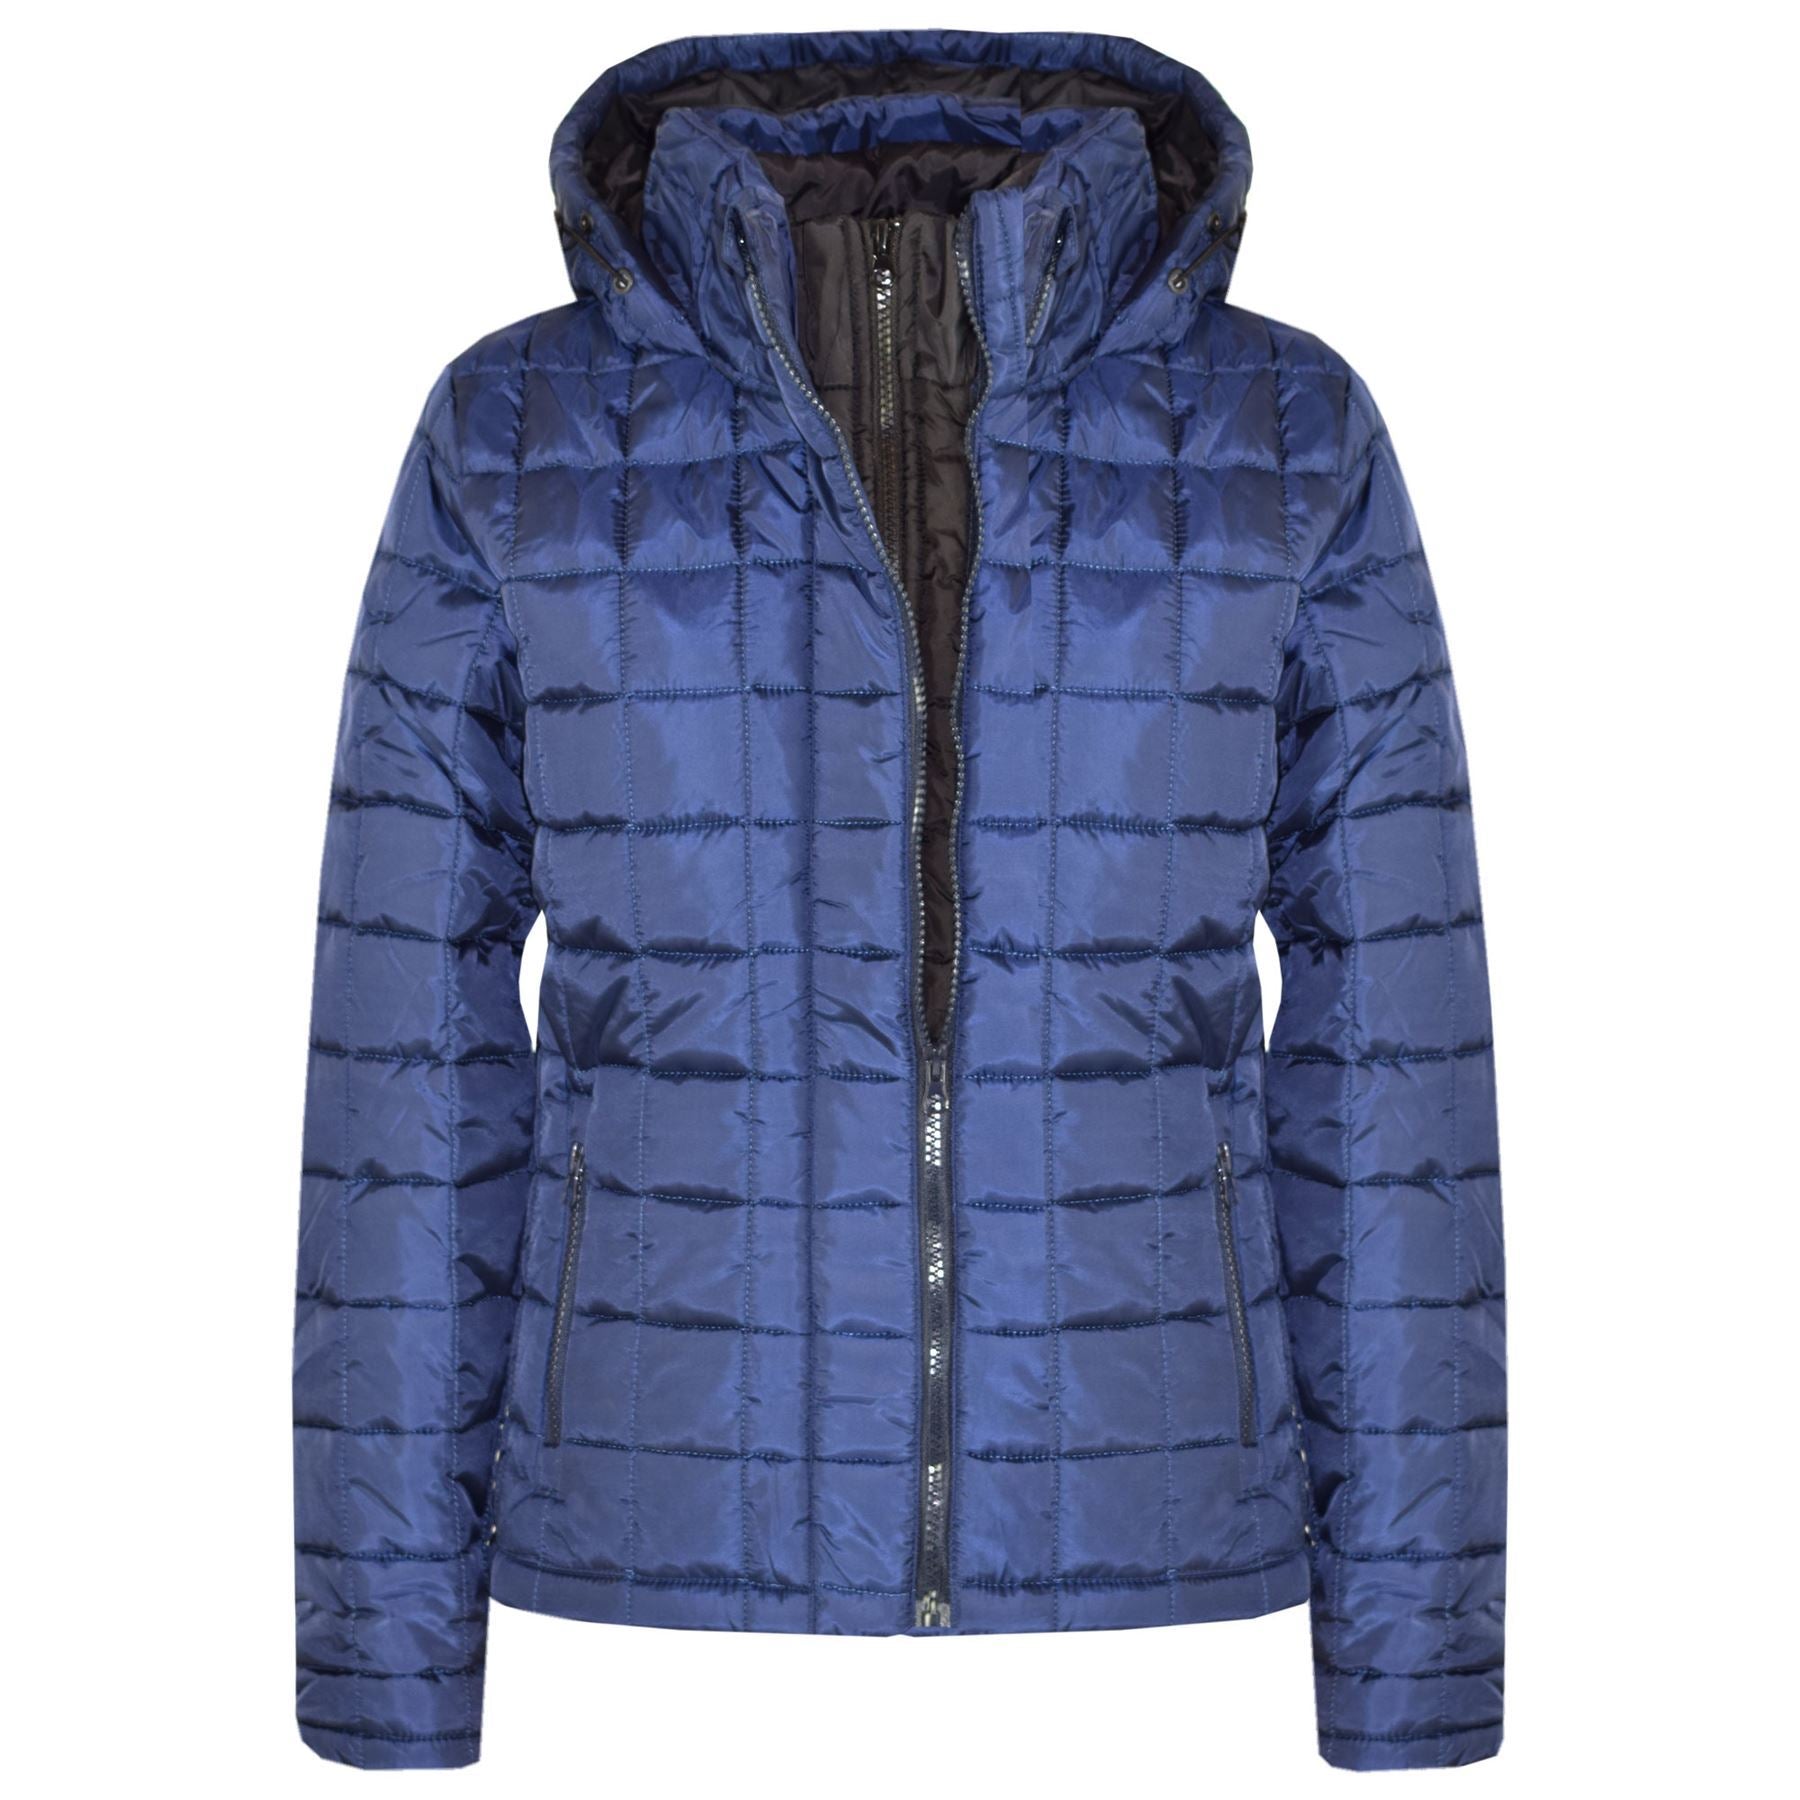 Kids Padded Navy Jackets Boys Hooded Puffer